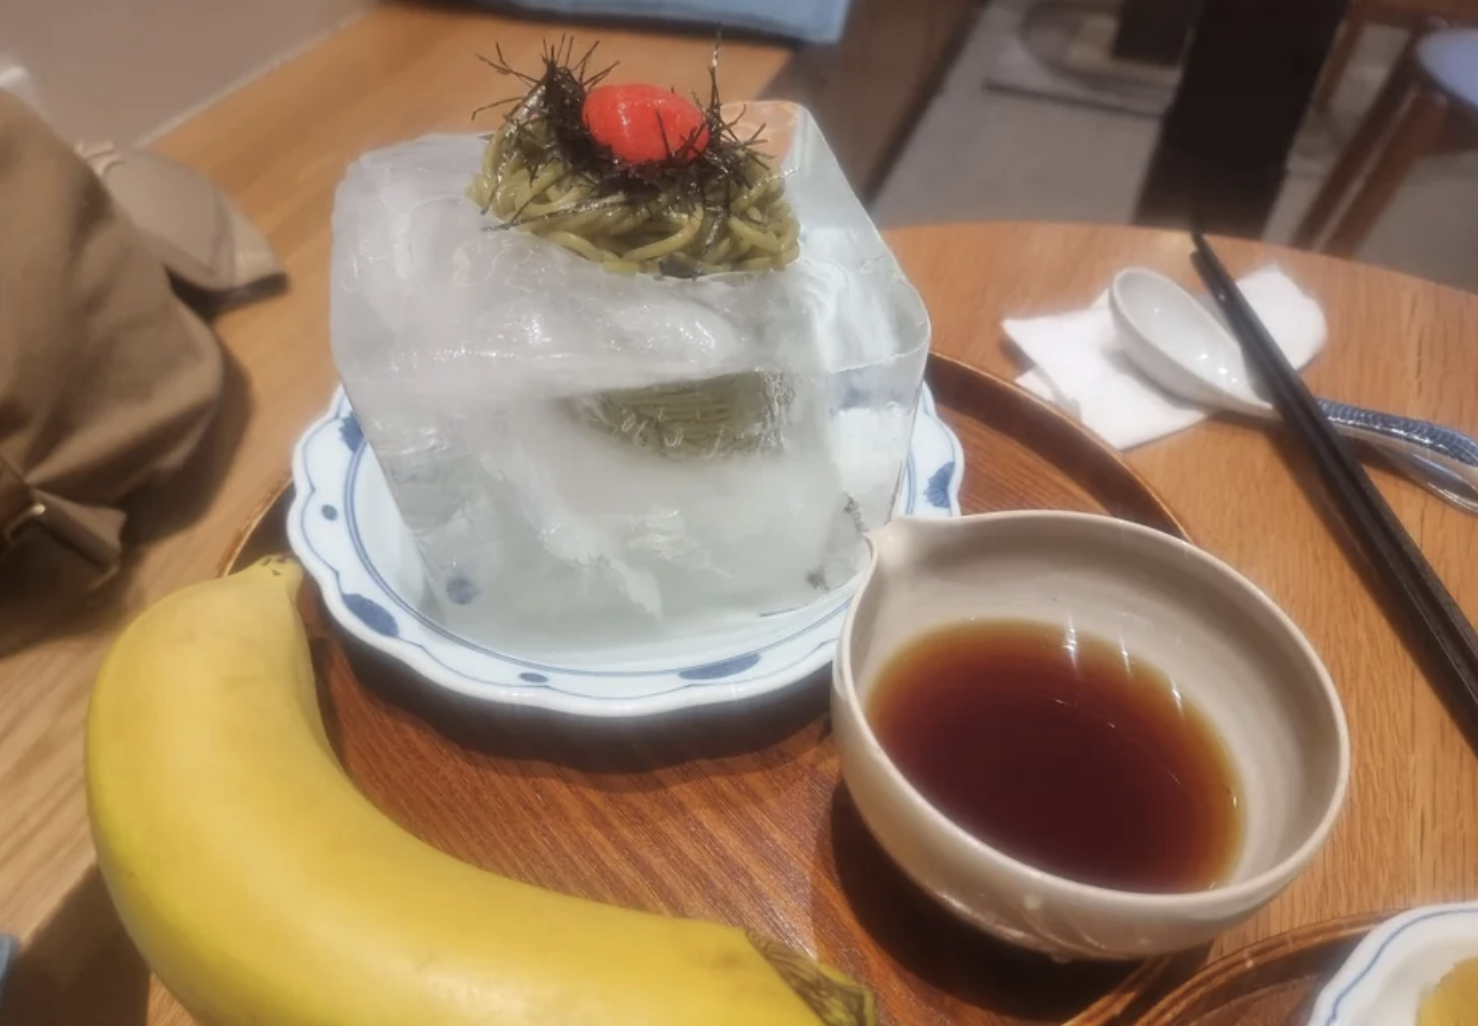 Noodles in a block of ice